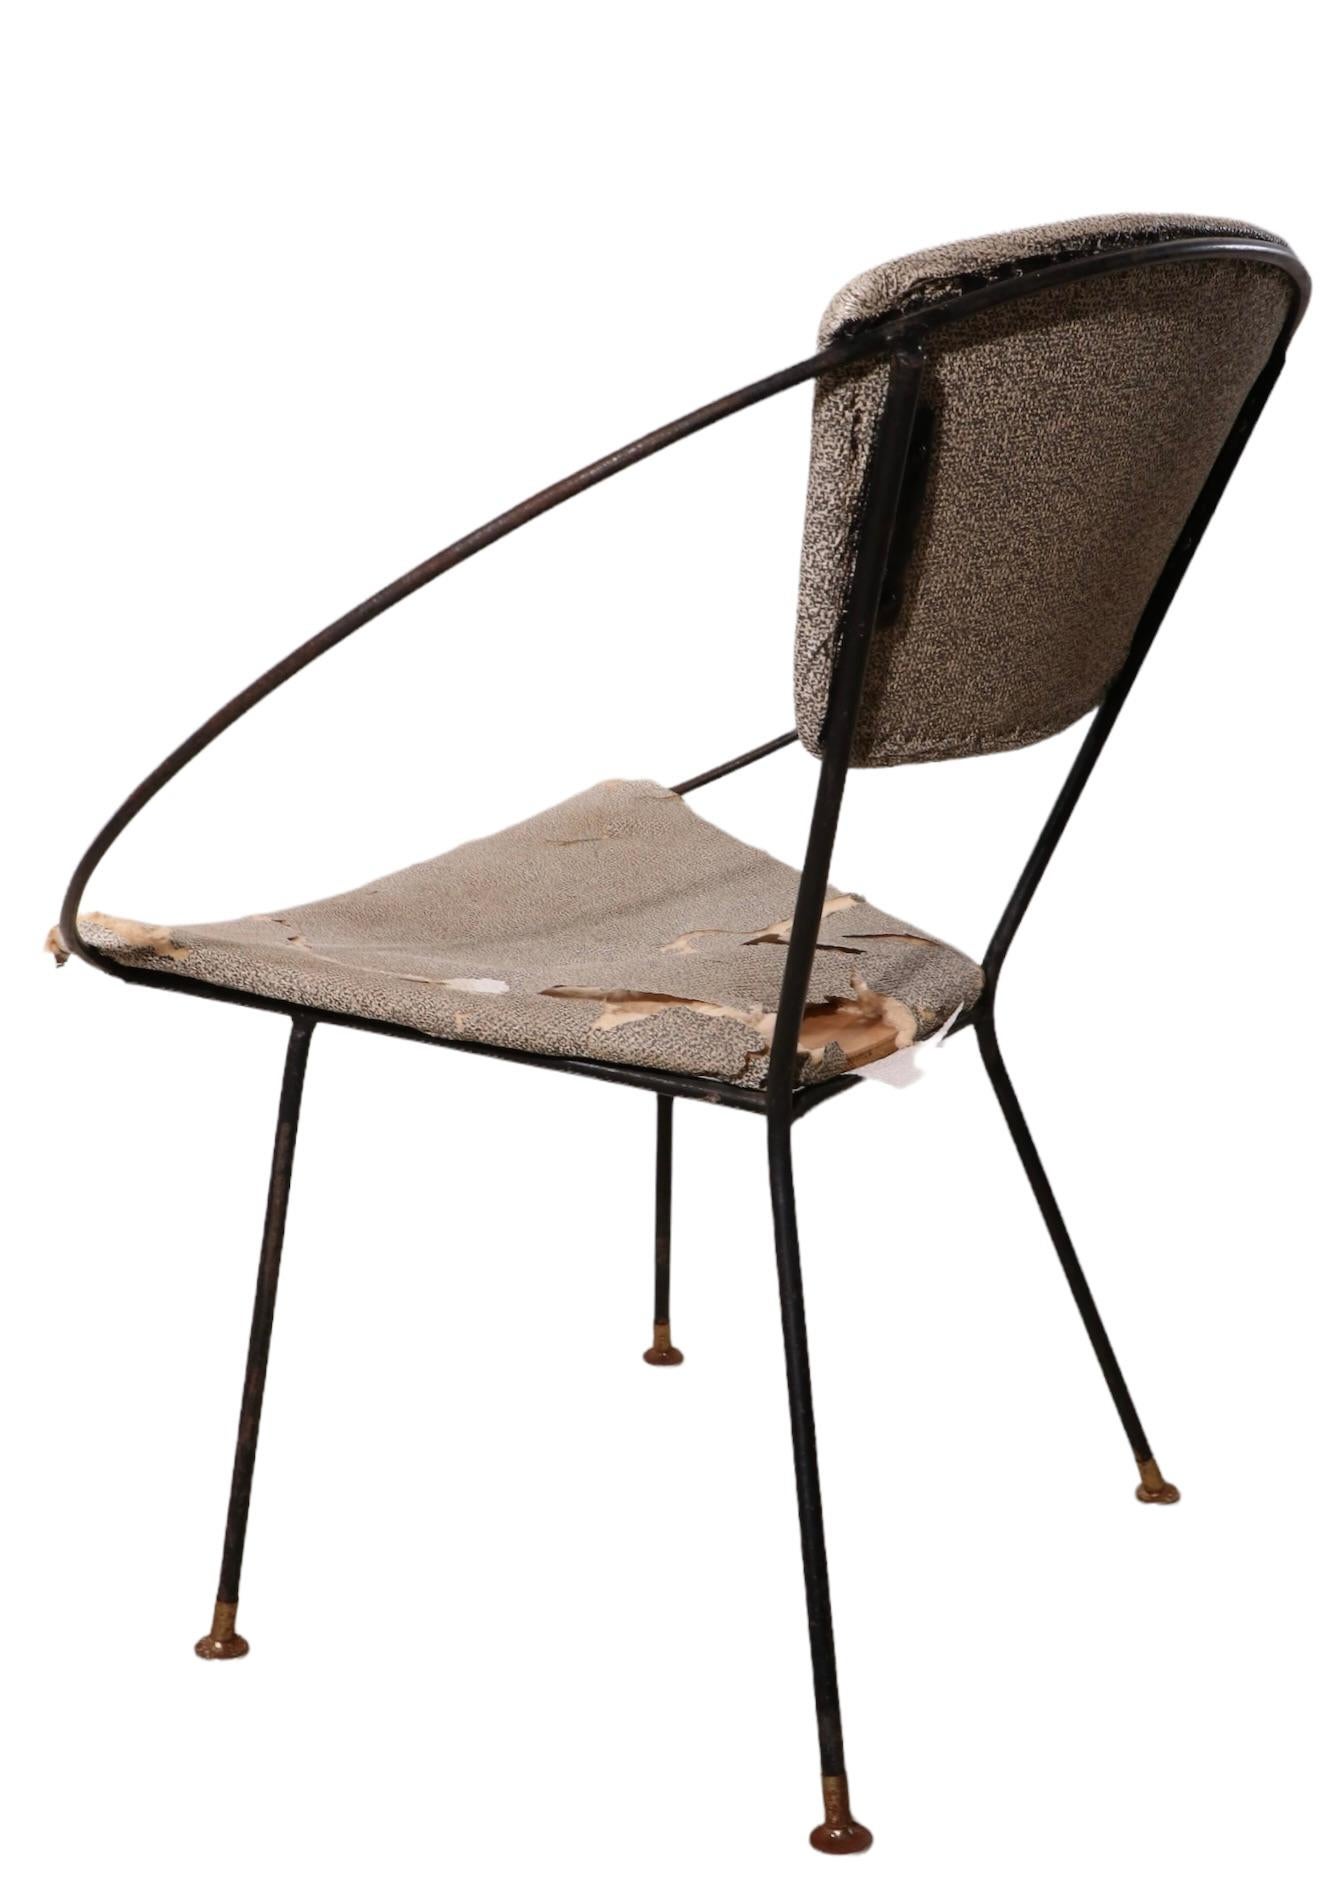 Pr. Wrought Iron Mid Century Hoop Chairs by John Cicchelli for Riley Wolff 1950s For Sale 4